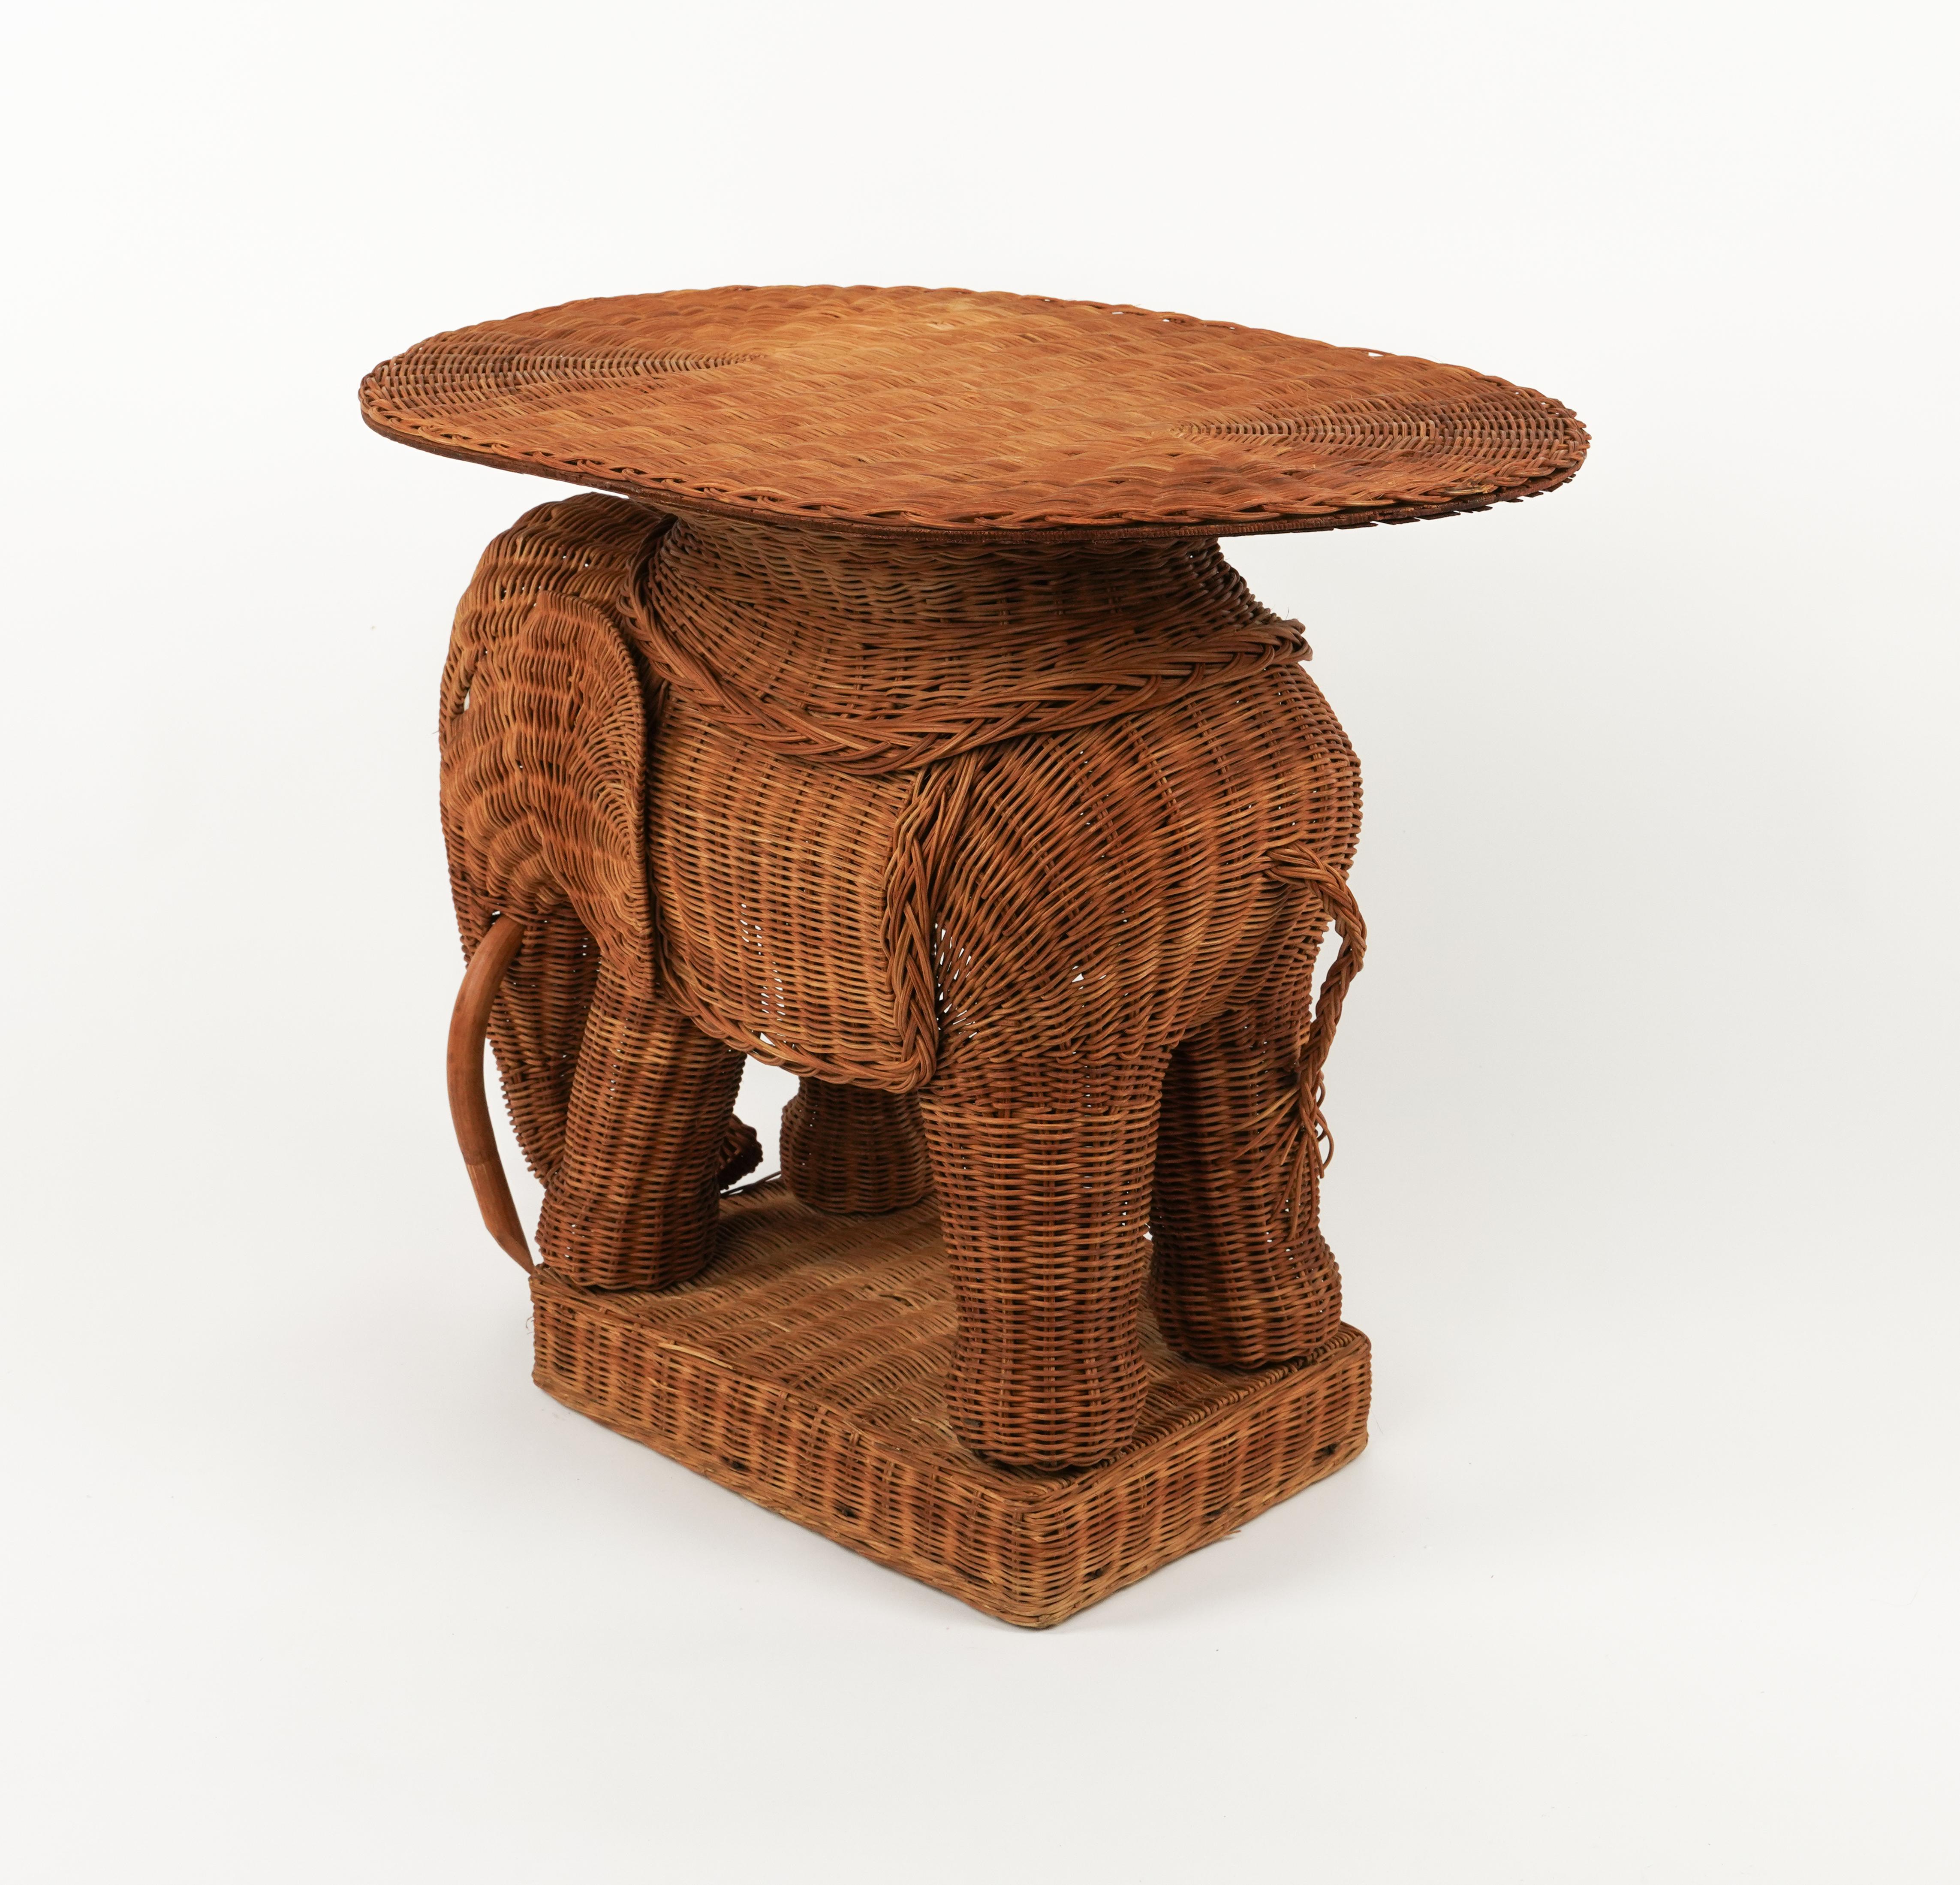 Rattan and Wicker Elephant Side Coffee Table Vivai Del Sud Style, Italy, 1960s For Sale 12